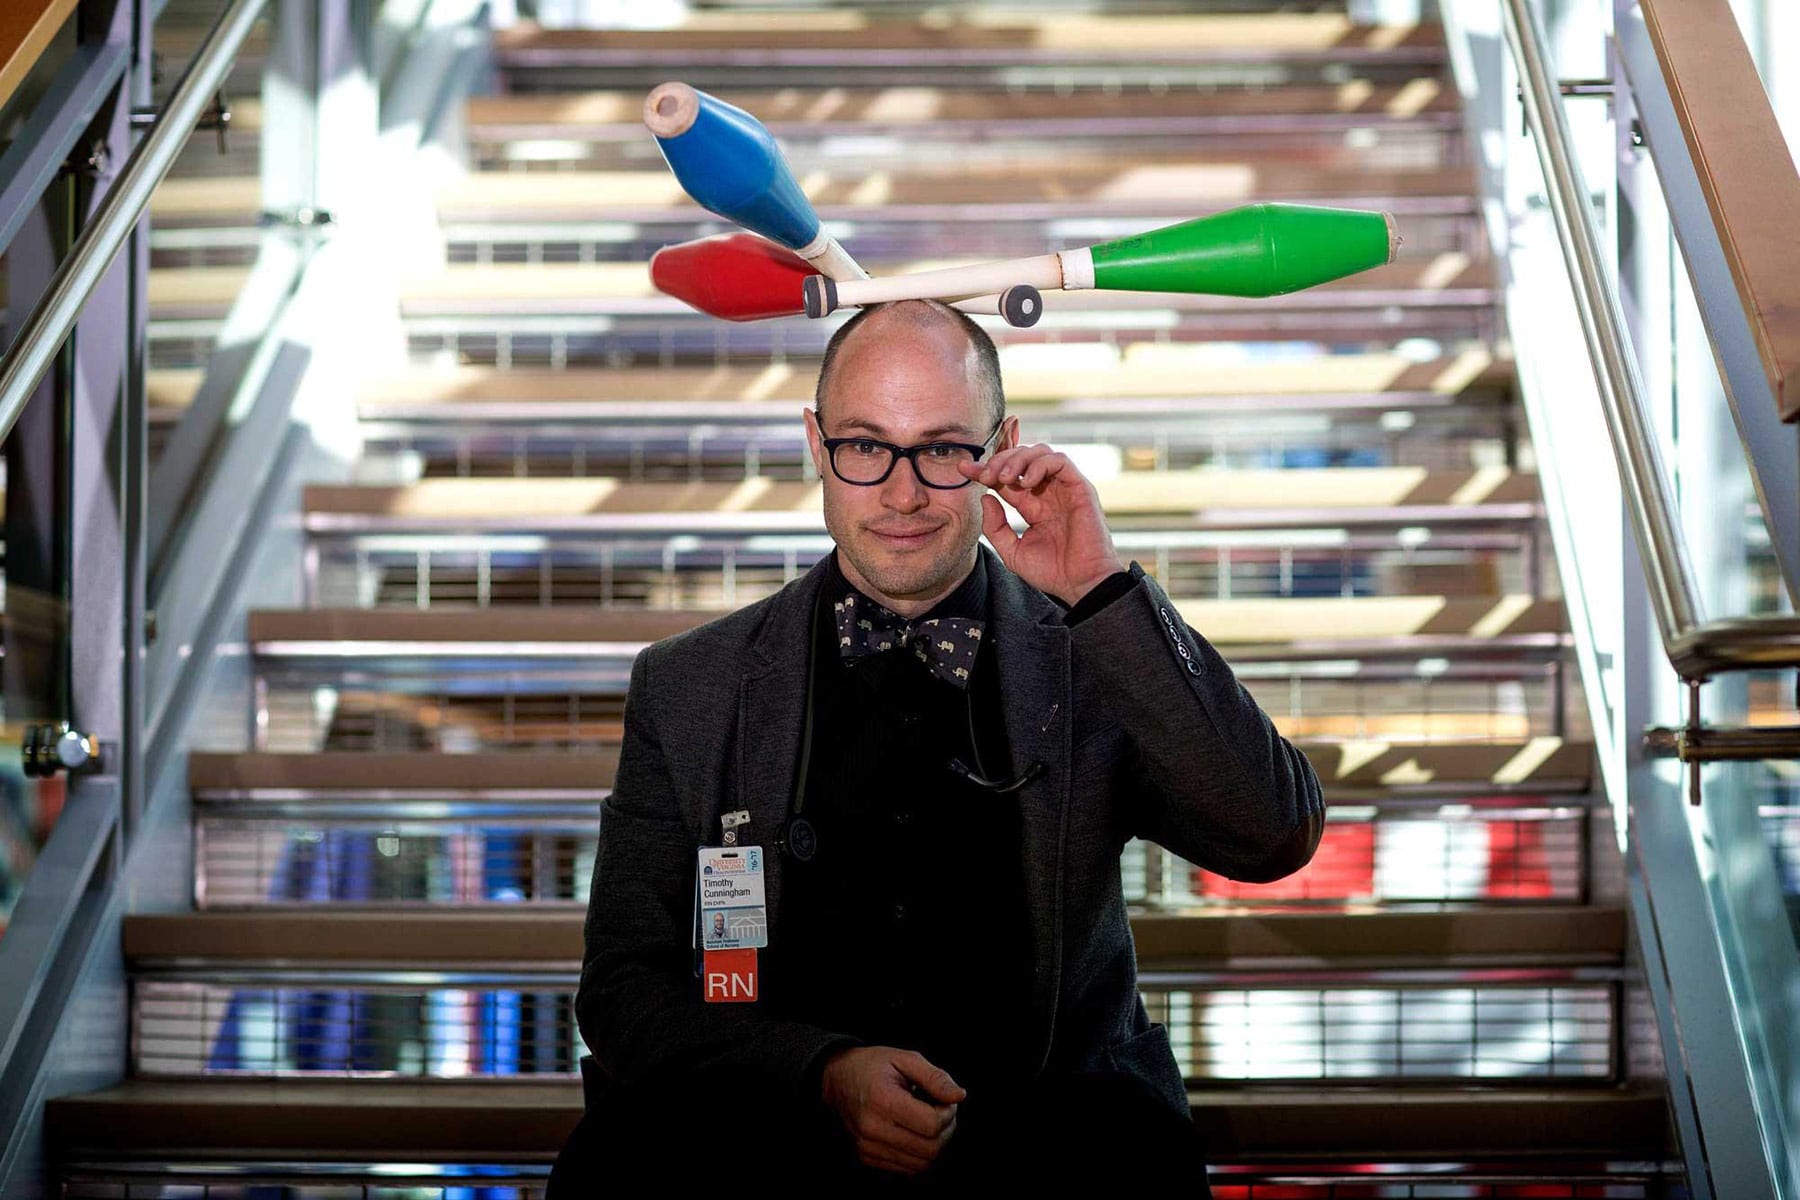 Tim Cunningham, a former clown, now a nurse, sits on a glass staircase with three juggling pins balanced on his head.